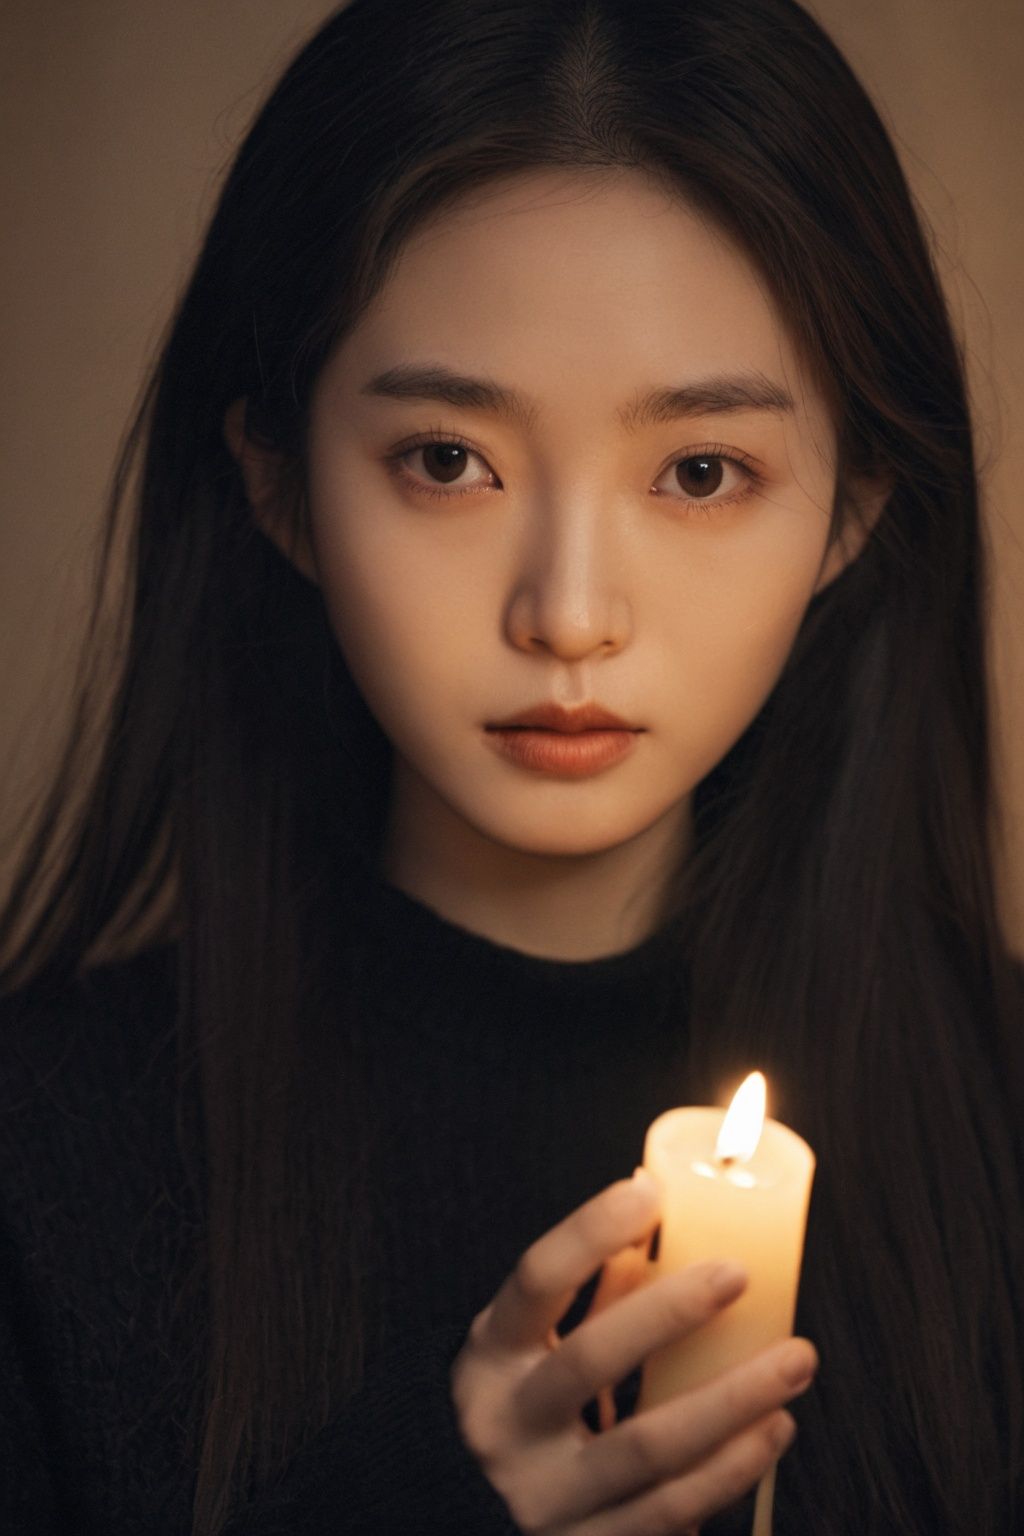 a Chinese woman with long hair and a black sweater is holding a candle in her hand and looking at the camera,